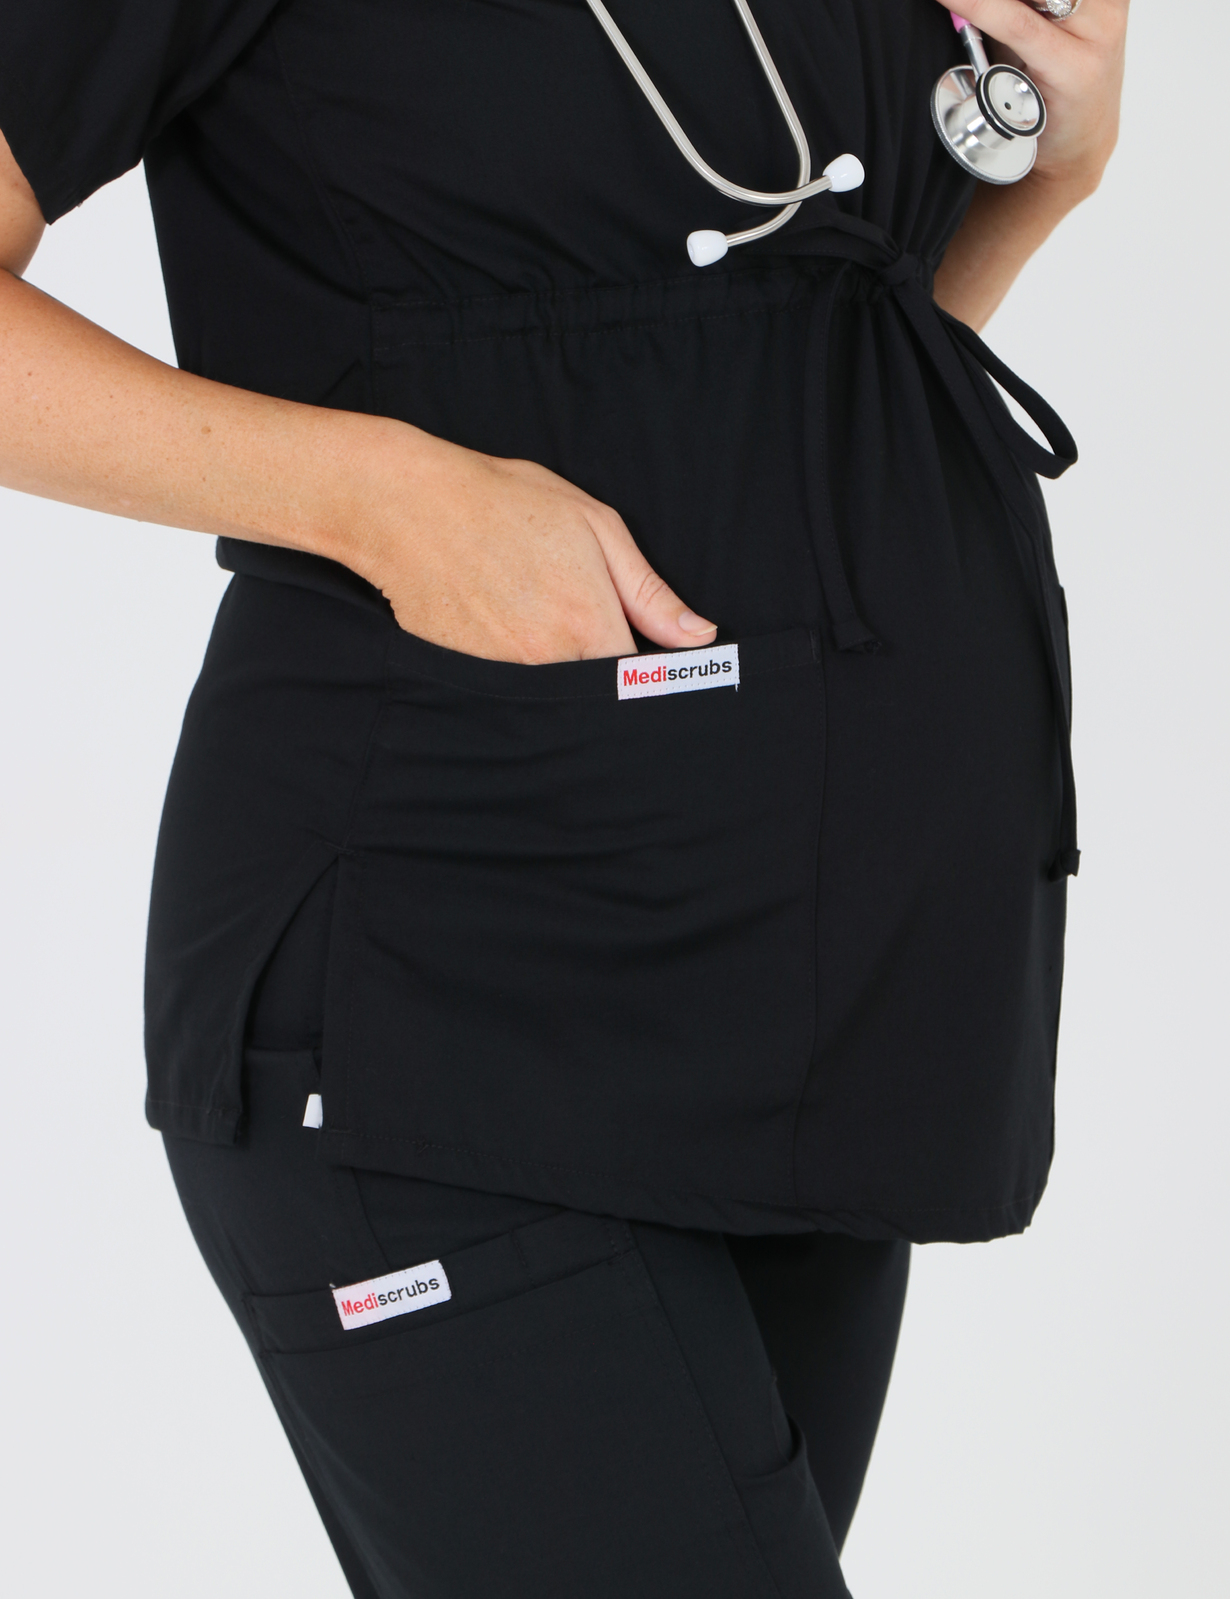 North Shore Private Hospital Radiographer Uniform Top Only Bundle ( Maternity With V-neck & Front Tie Top in Black + Logo)